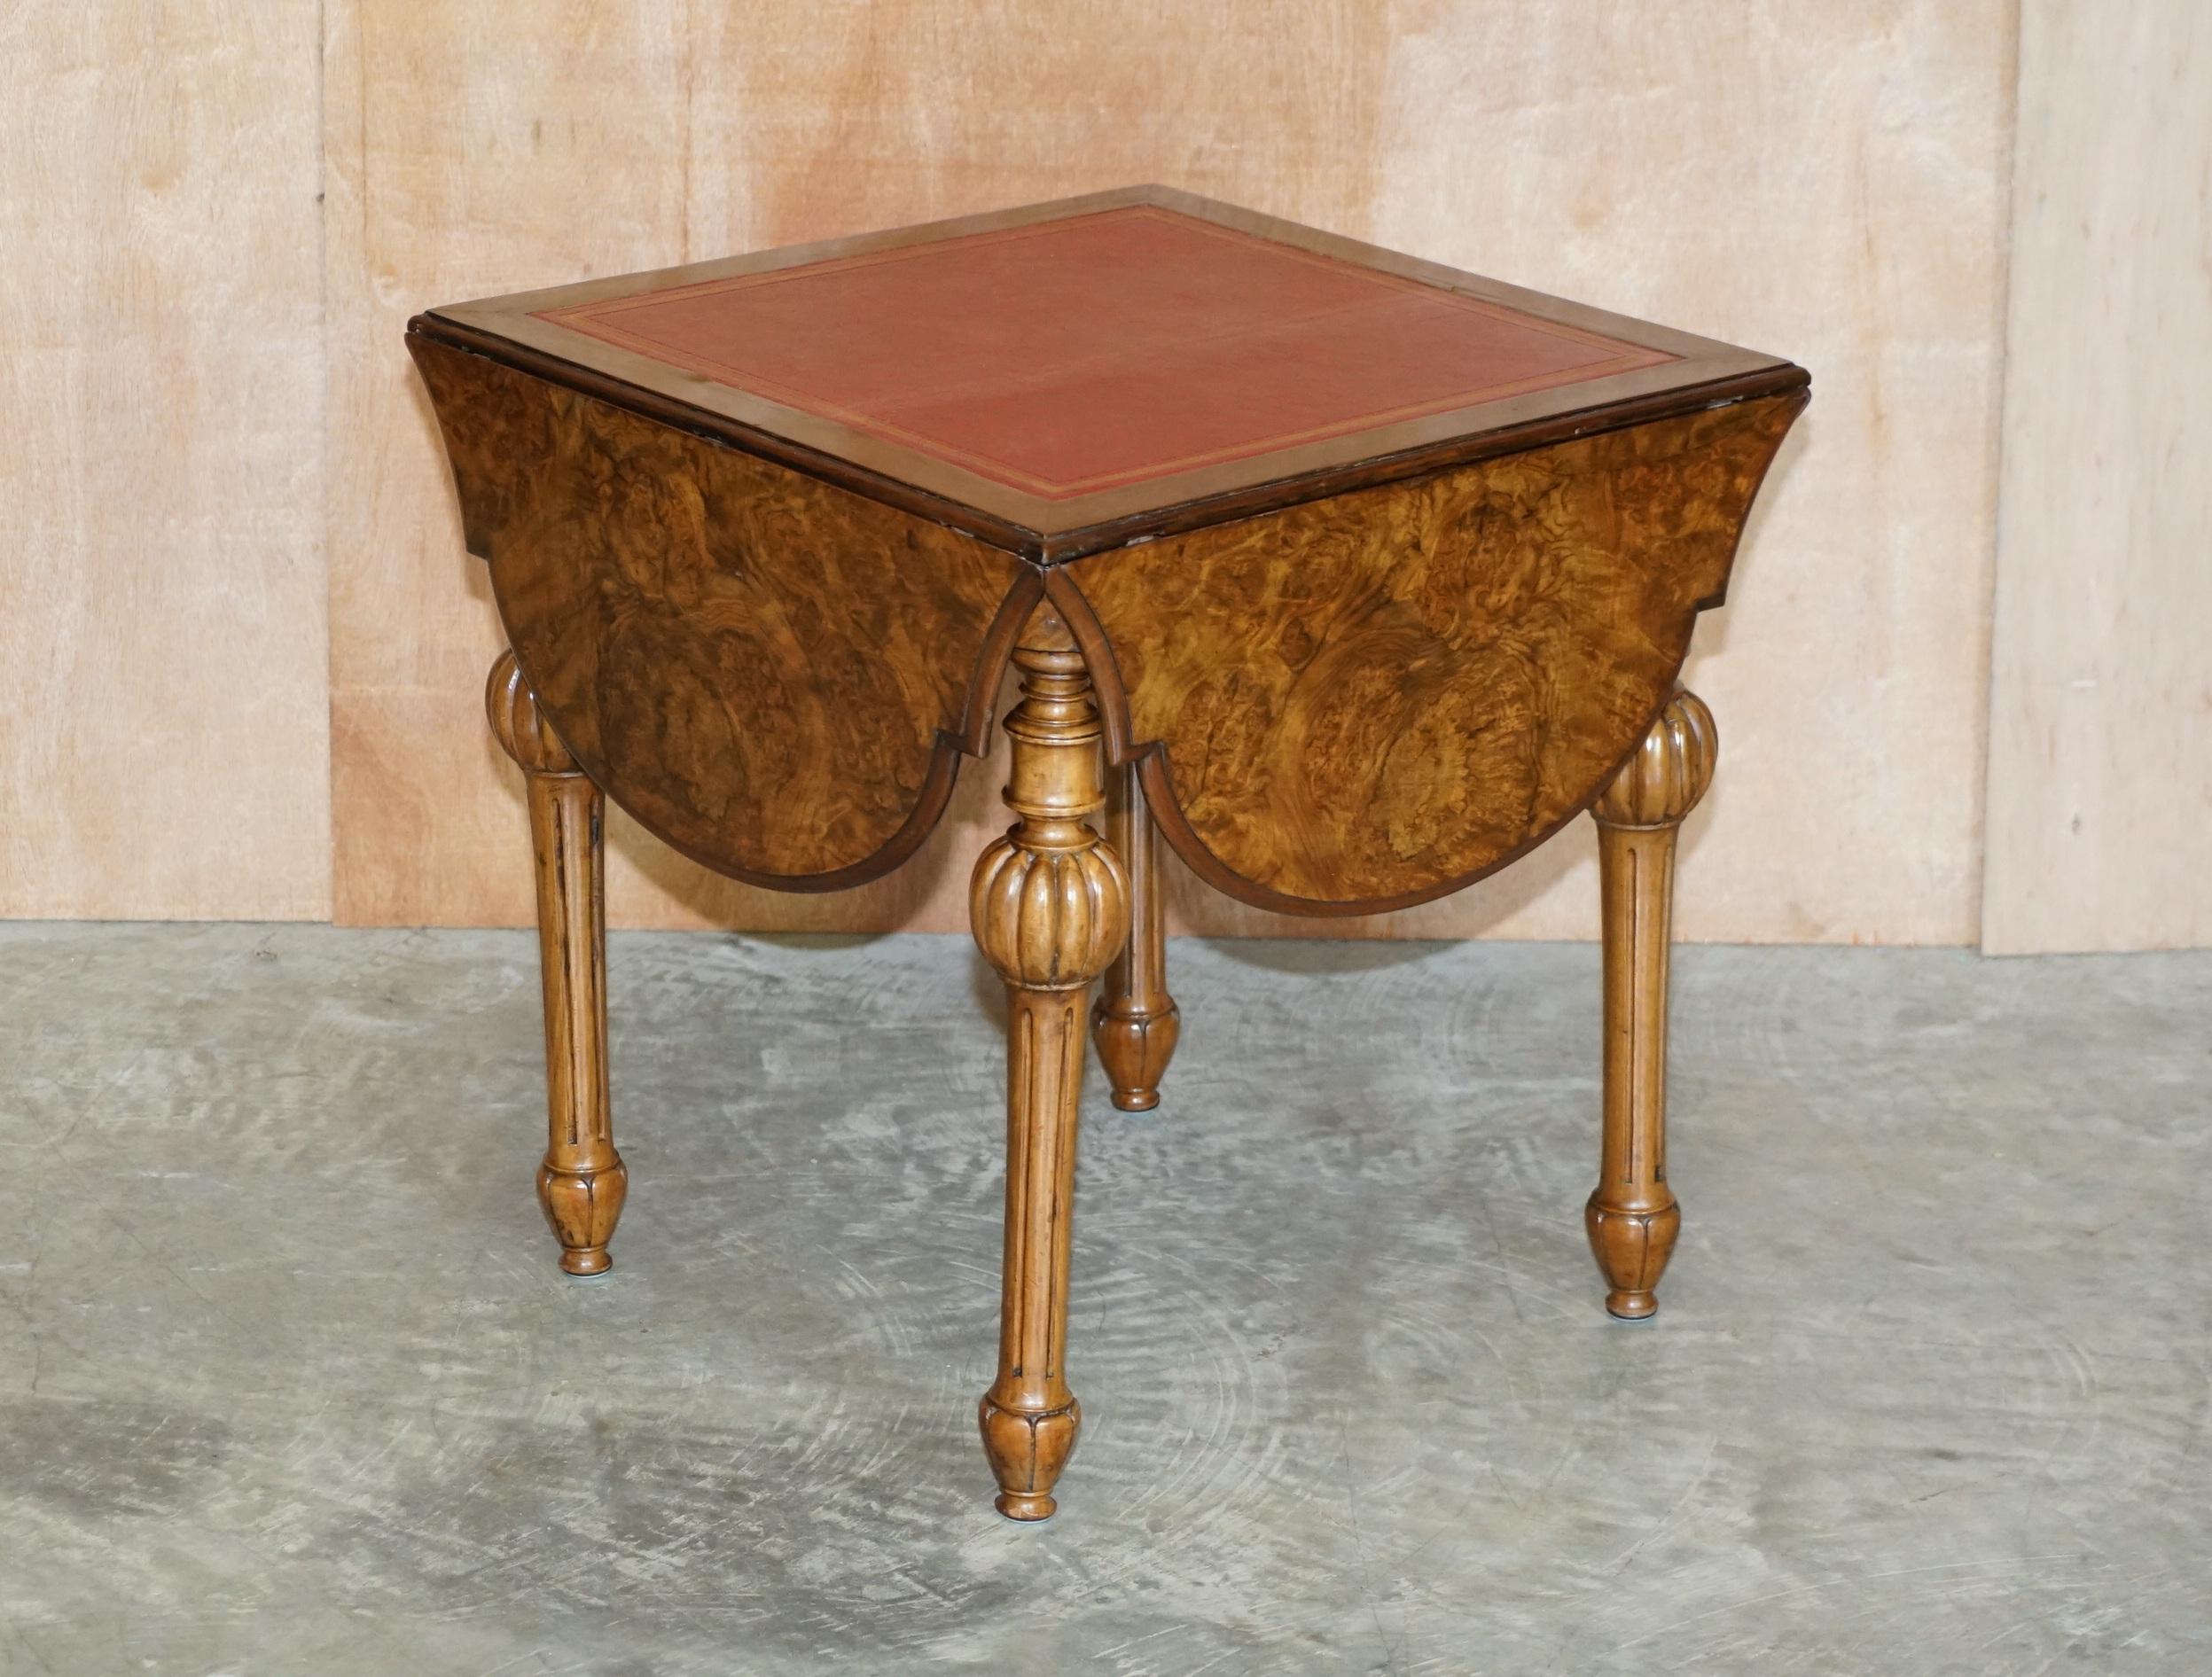 We are delighted to offer for sale this lovely circa 1880 Burr Walnut Envelope games card table with ornately carved legs

A very good-looking and well made piece, made in the Regency style however it is late Victorian. The legs are beautifully